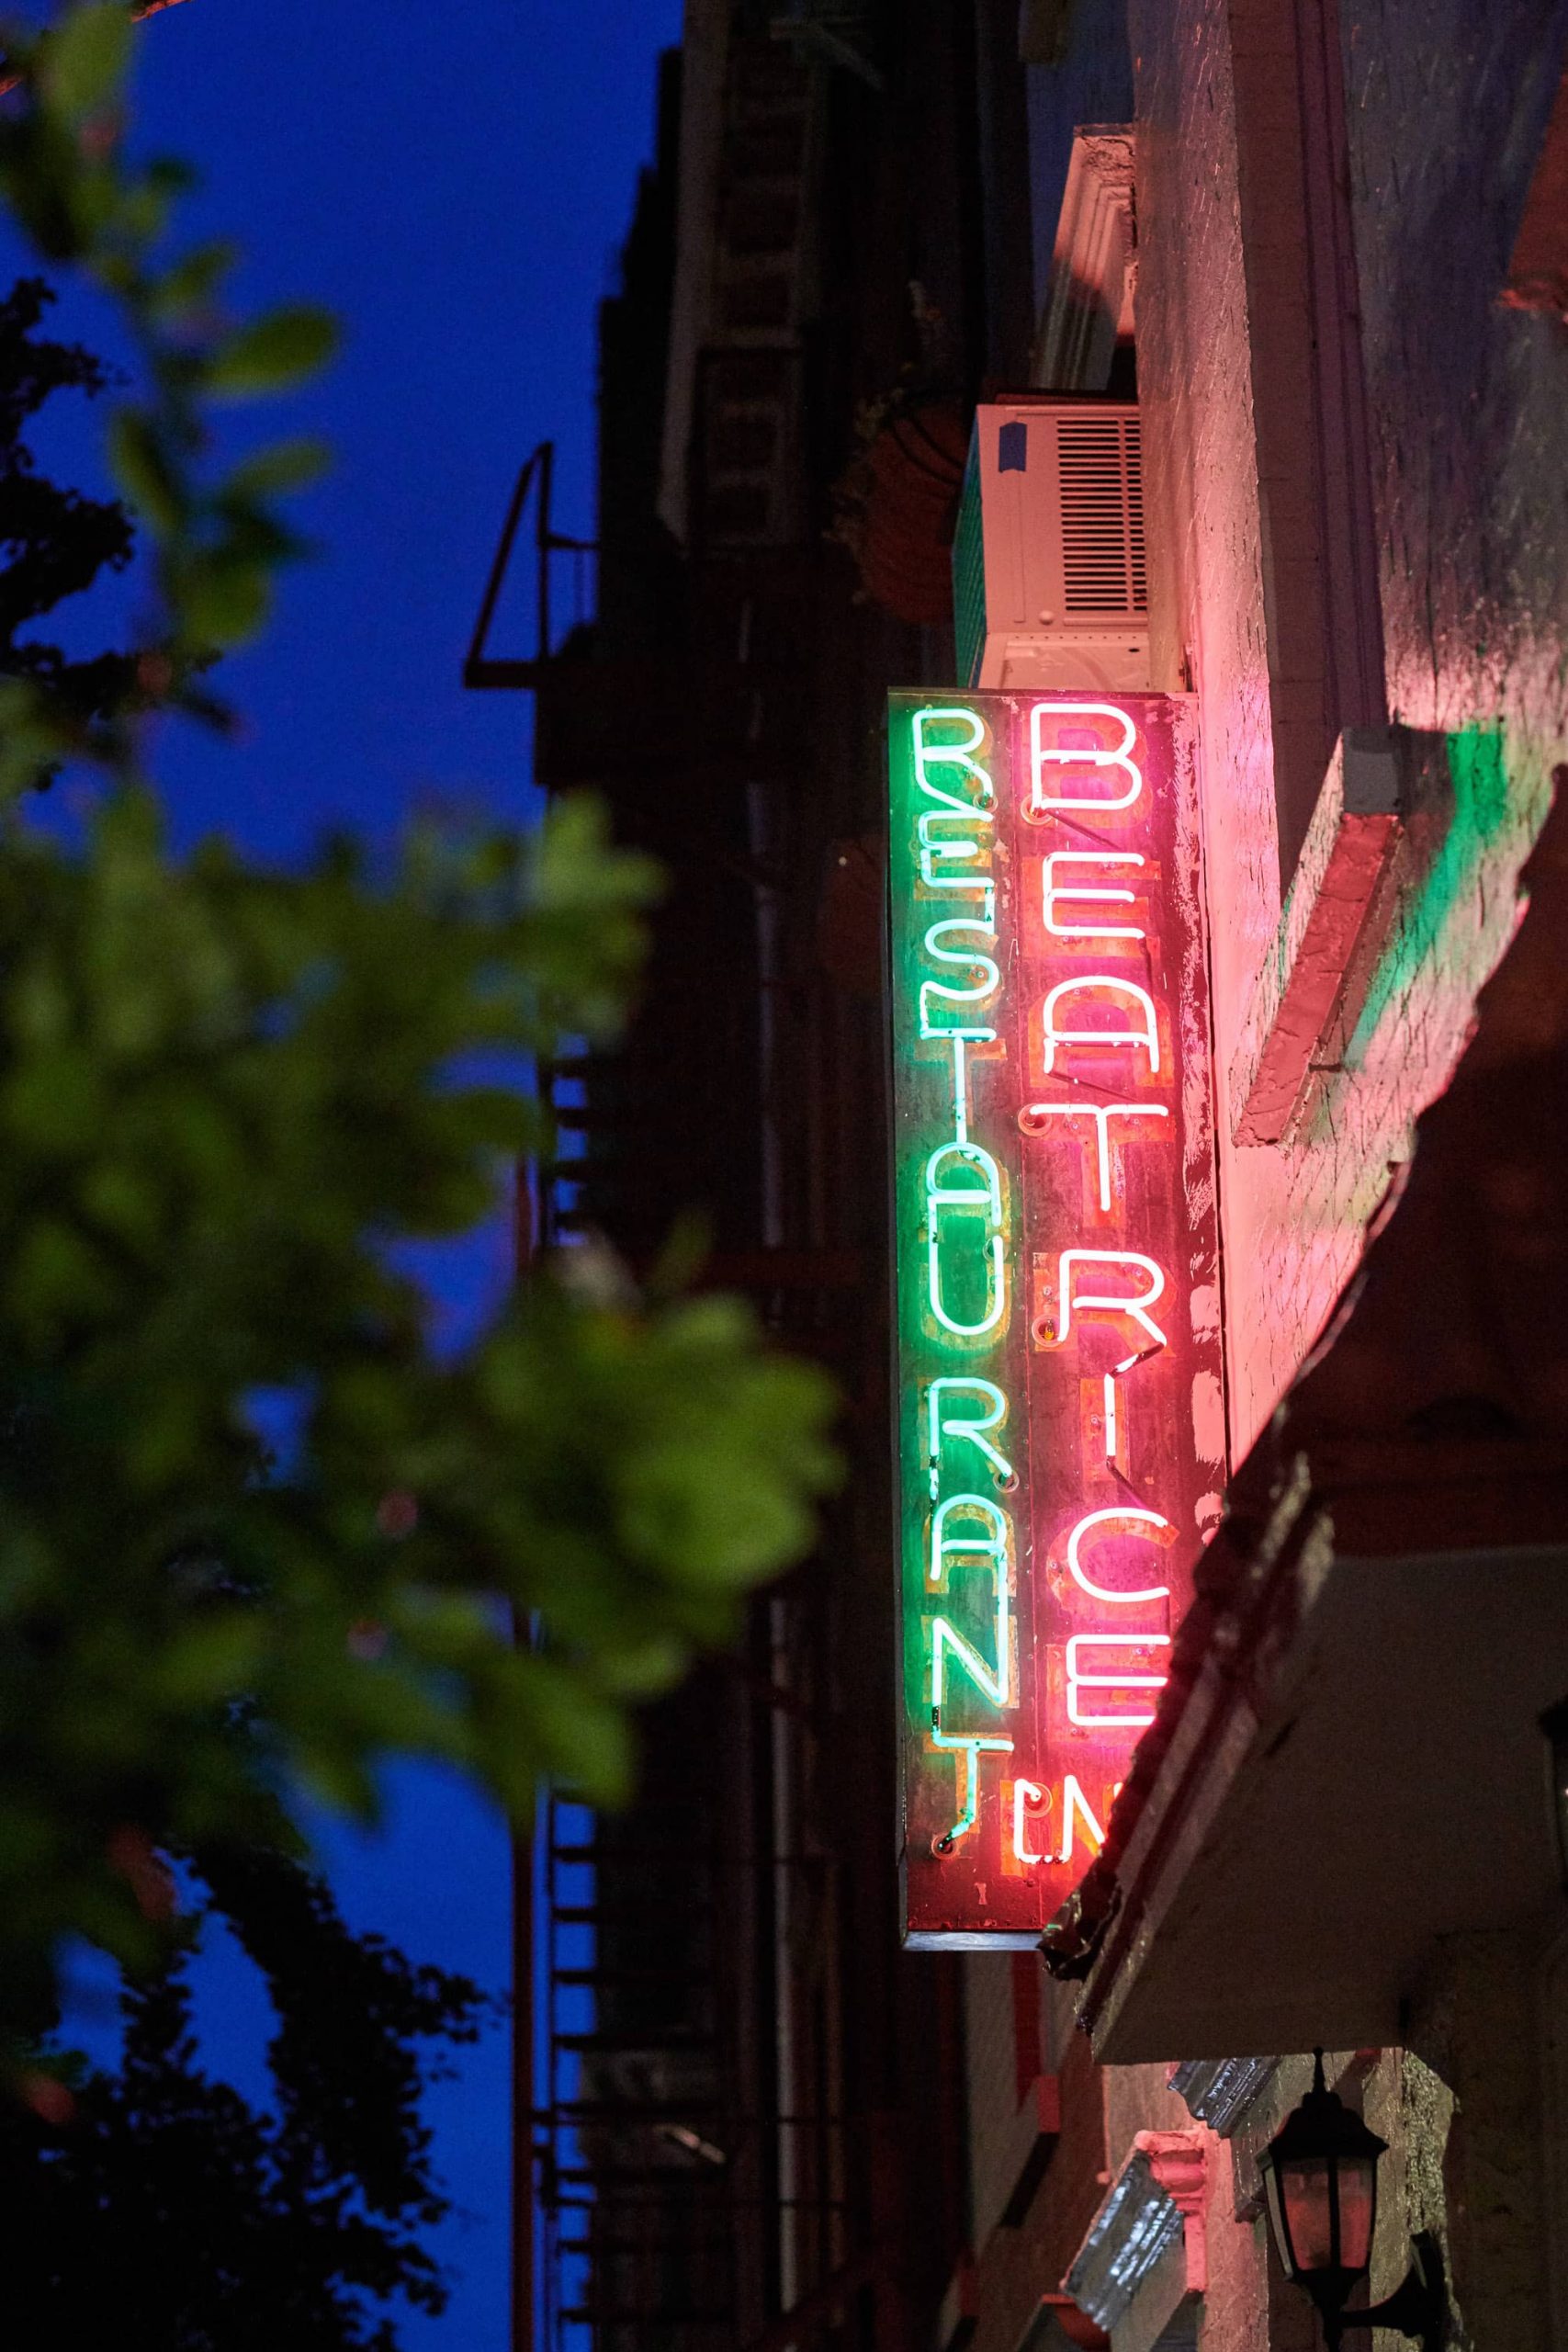 Beatrice Inn Restaurant neon sign at this 40th surprise birthday party at Beatrice Inn in West Village | Photo by Darren Ornitz